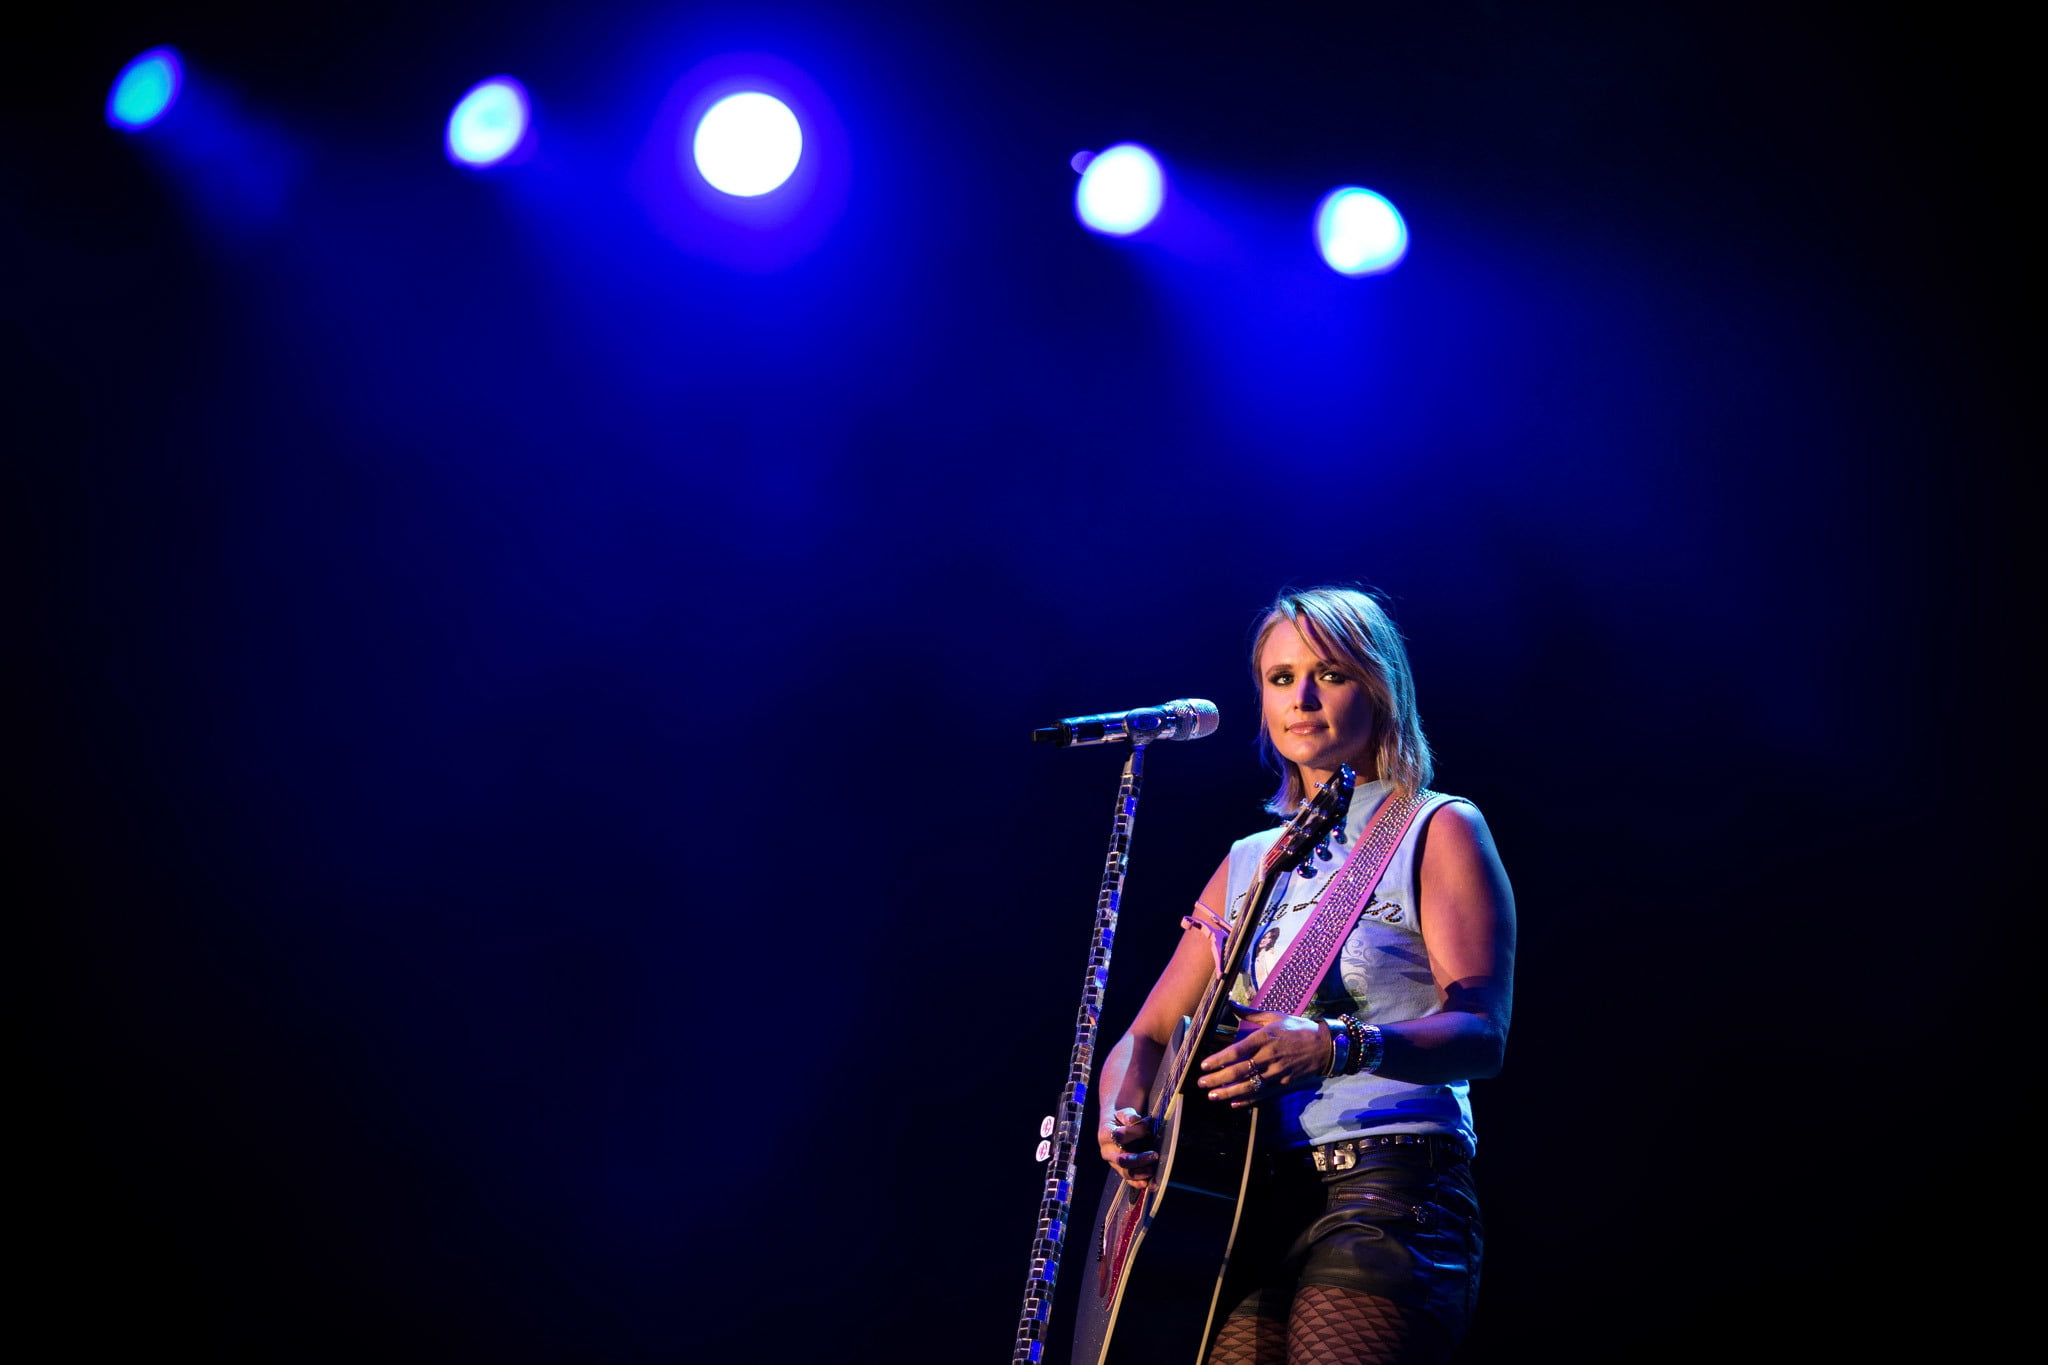 woman stands on stage playing guitar and using microphone with blue lights